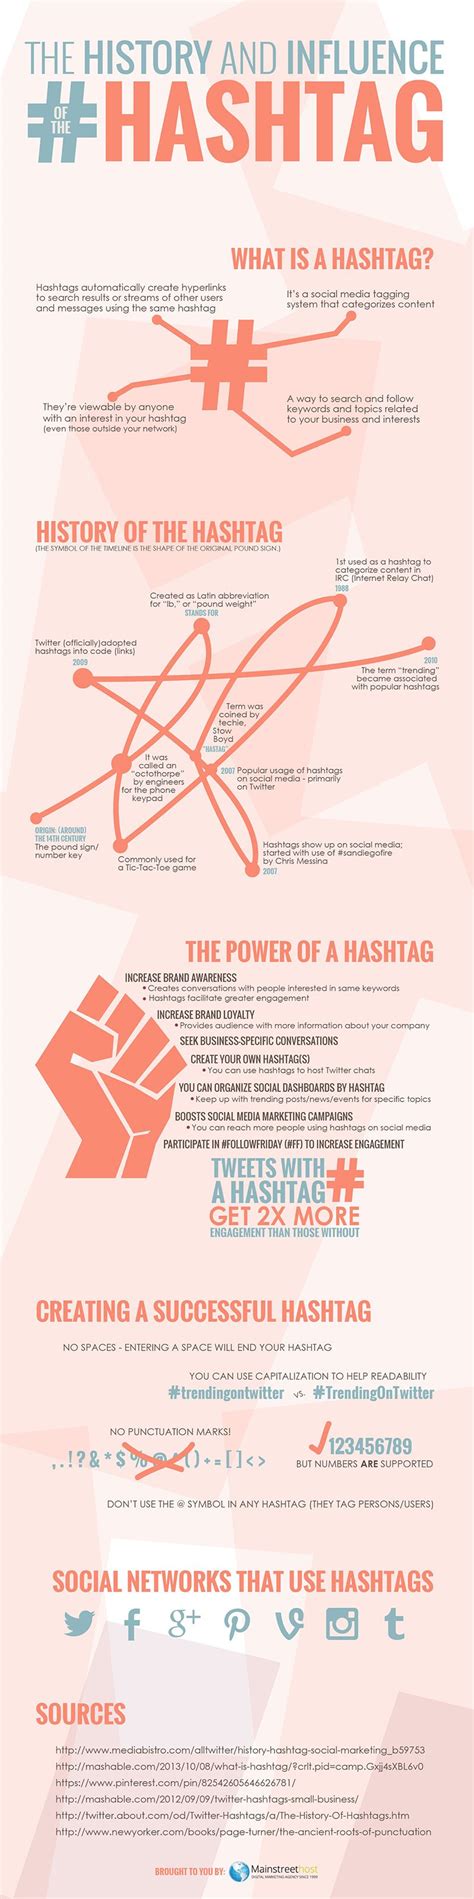 social media hashtags what they are and 5 reasons you should use them redes sociales